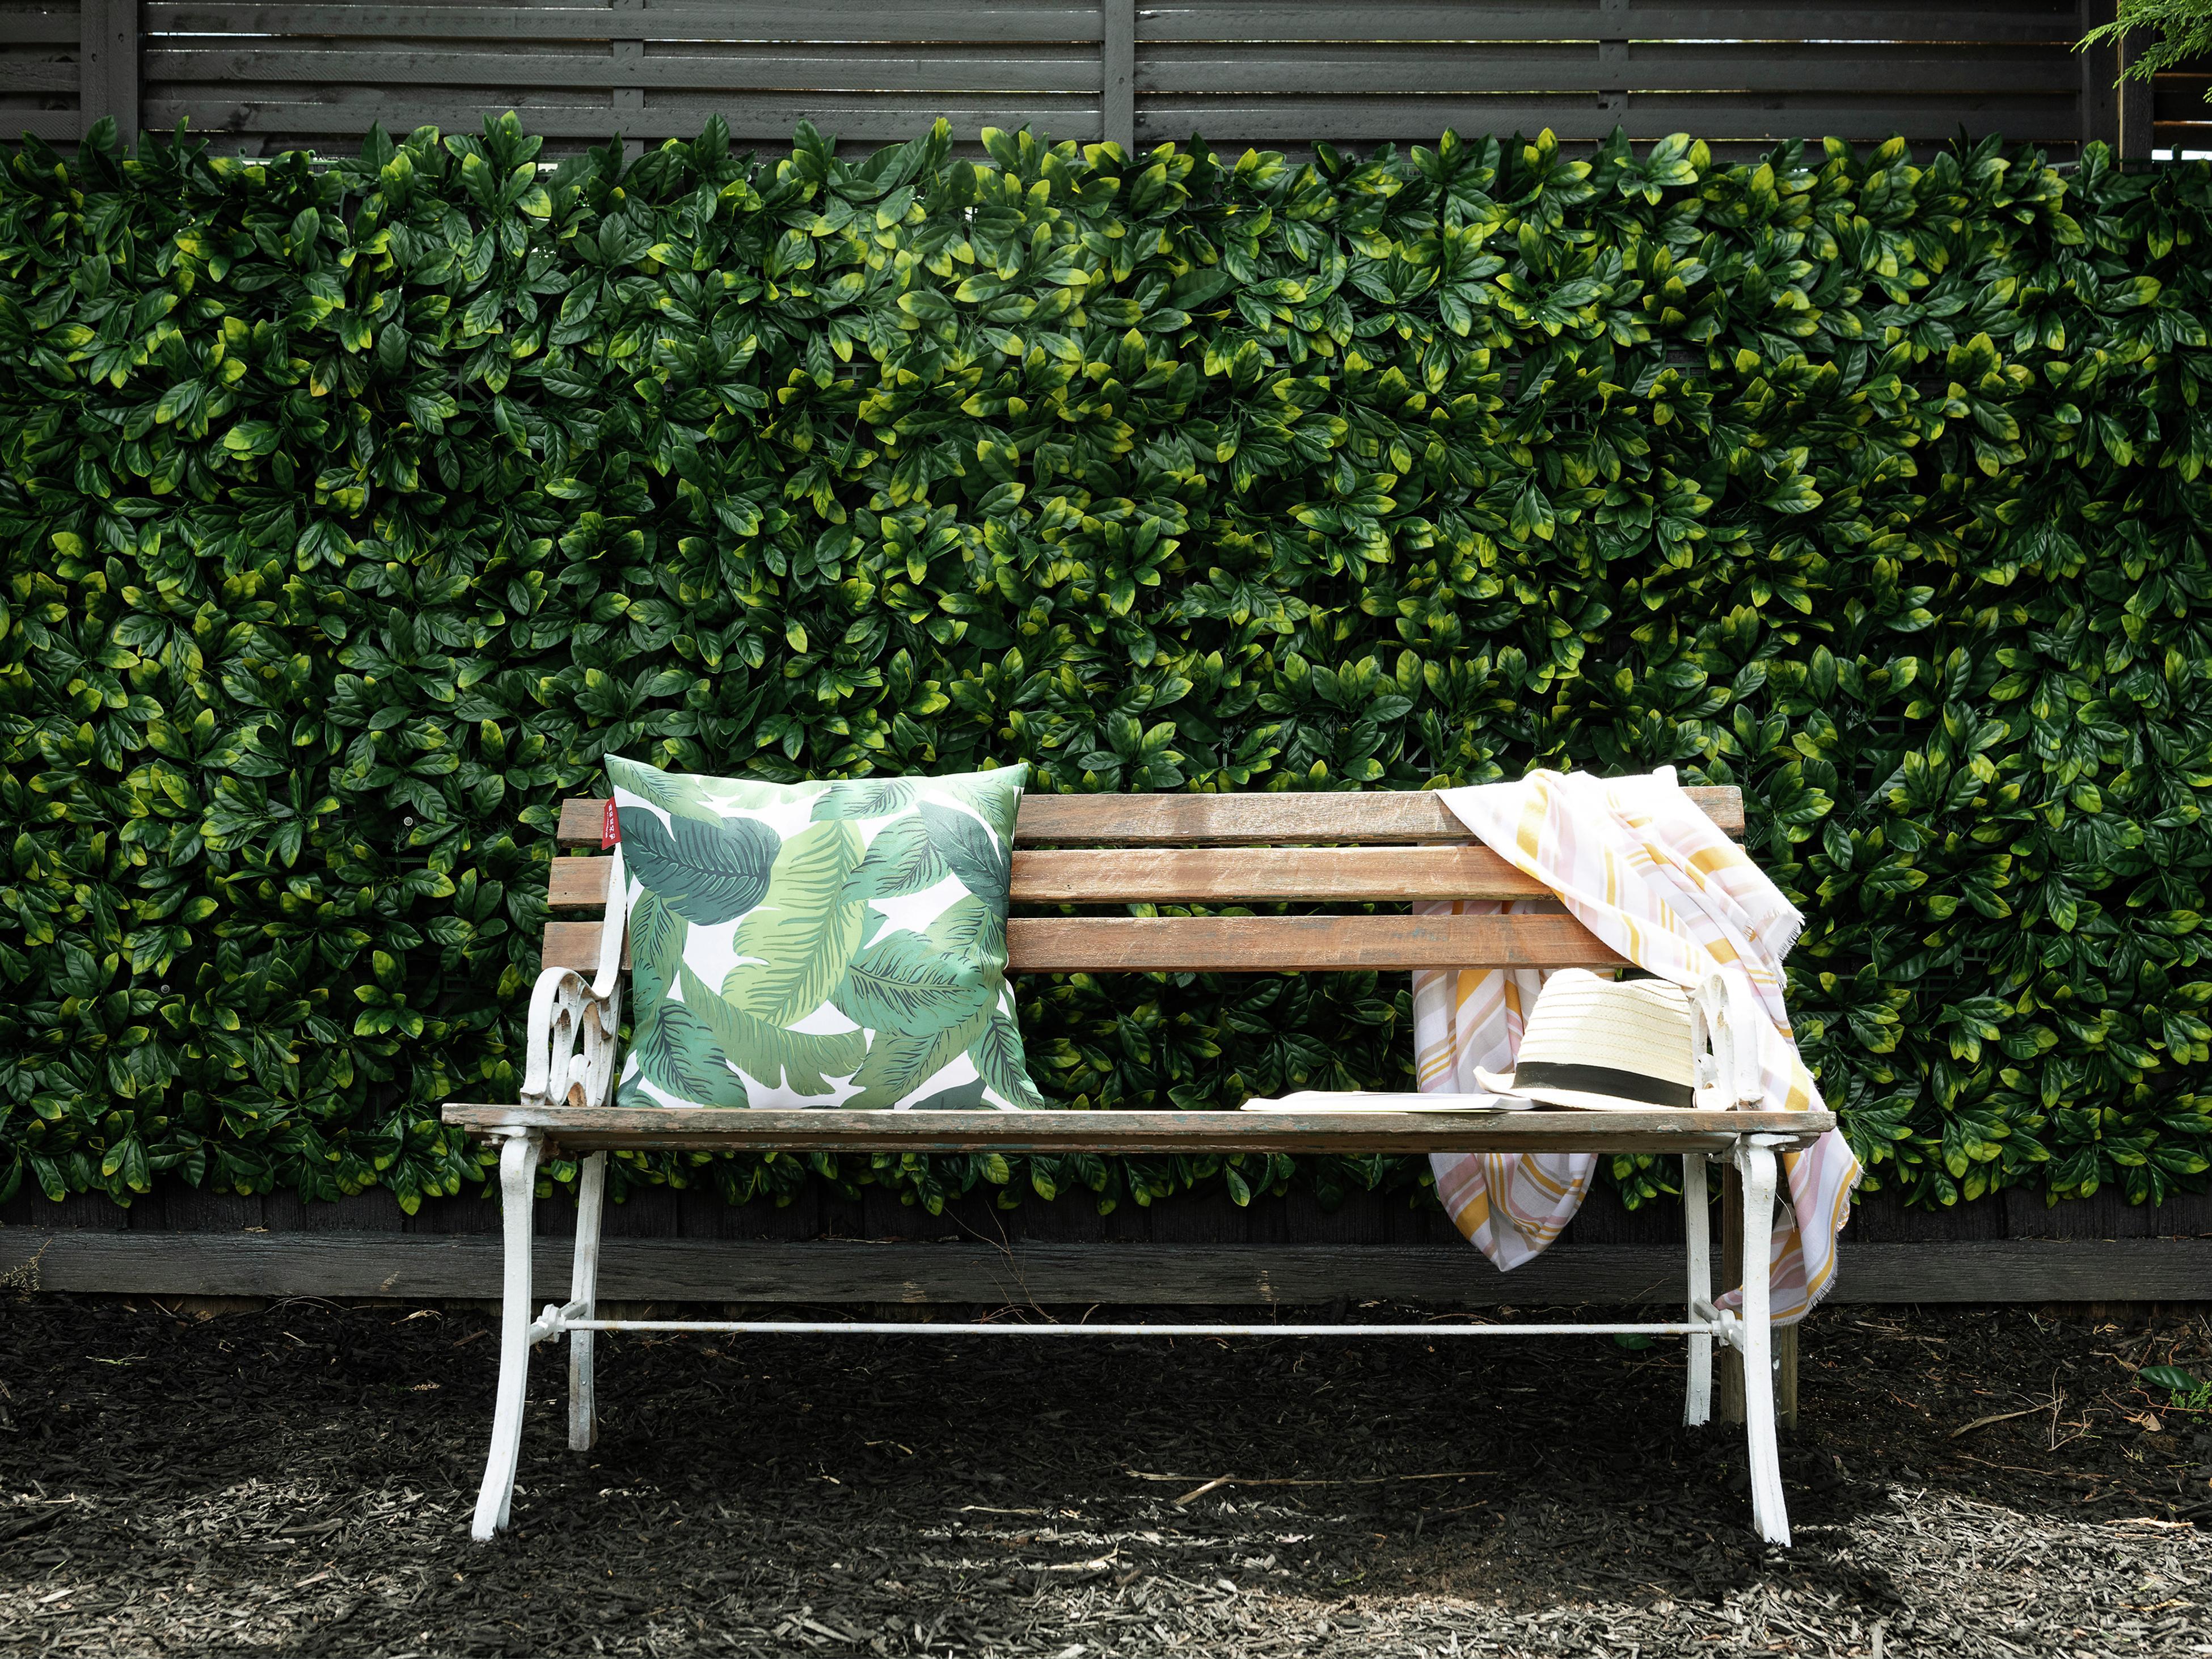 Buy a ready-made artificial Ivy hedge